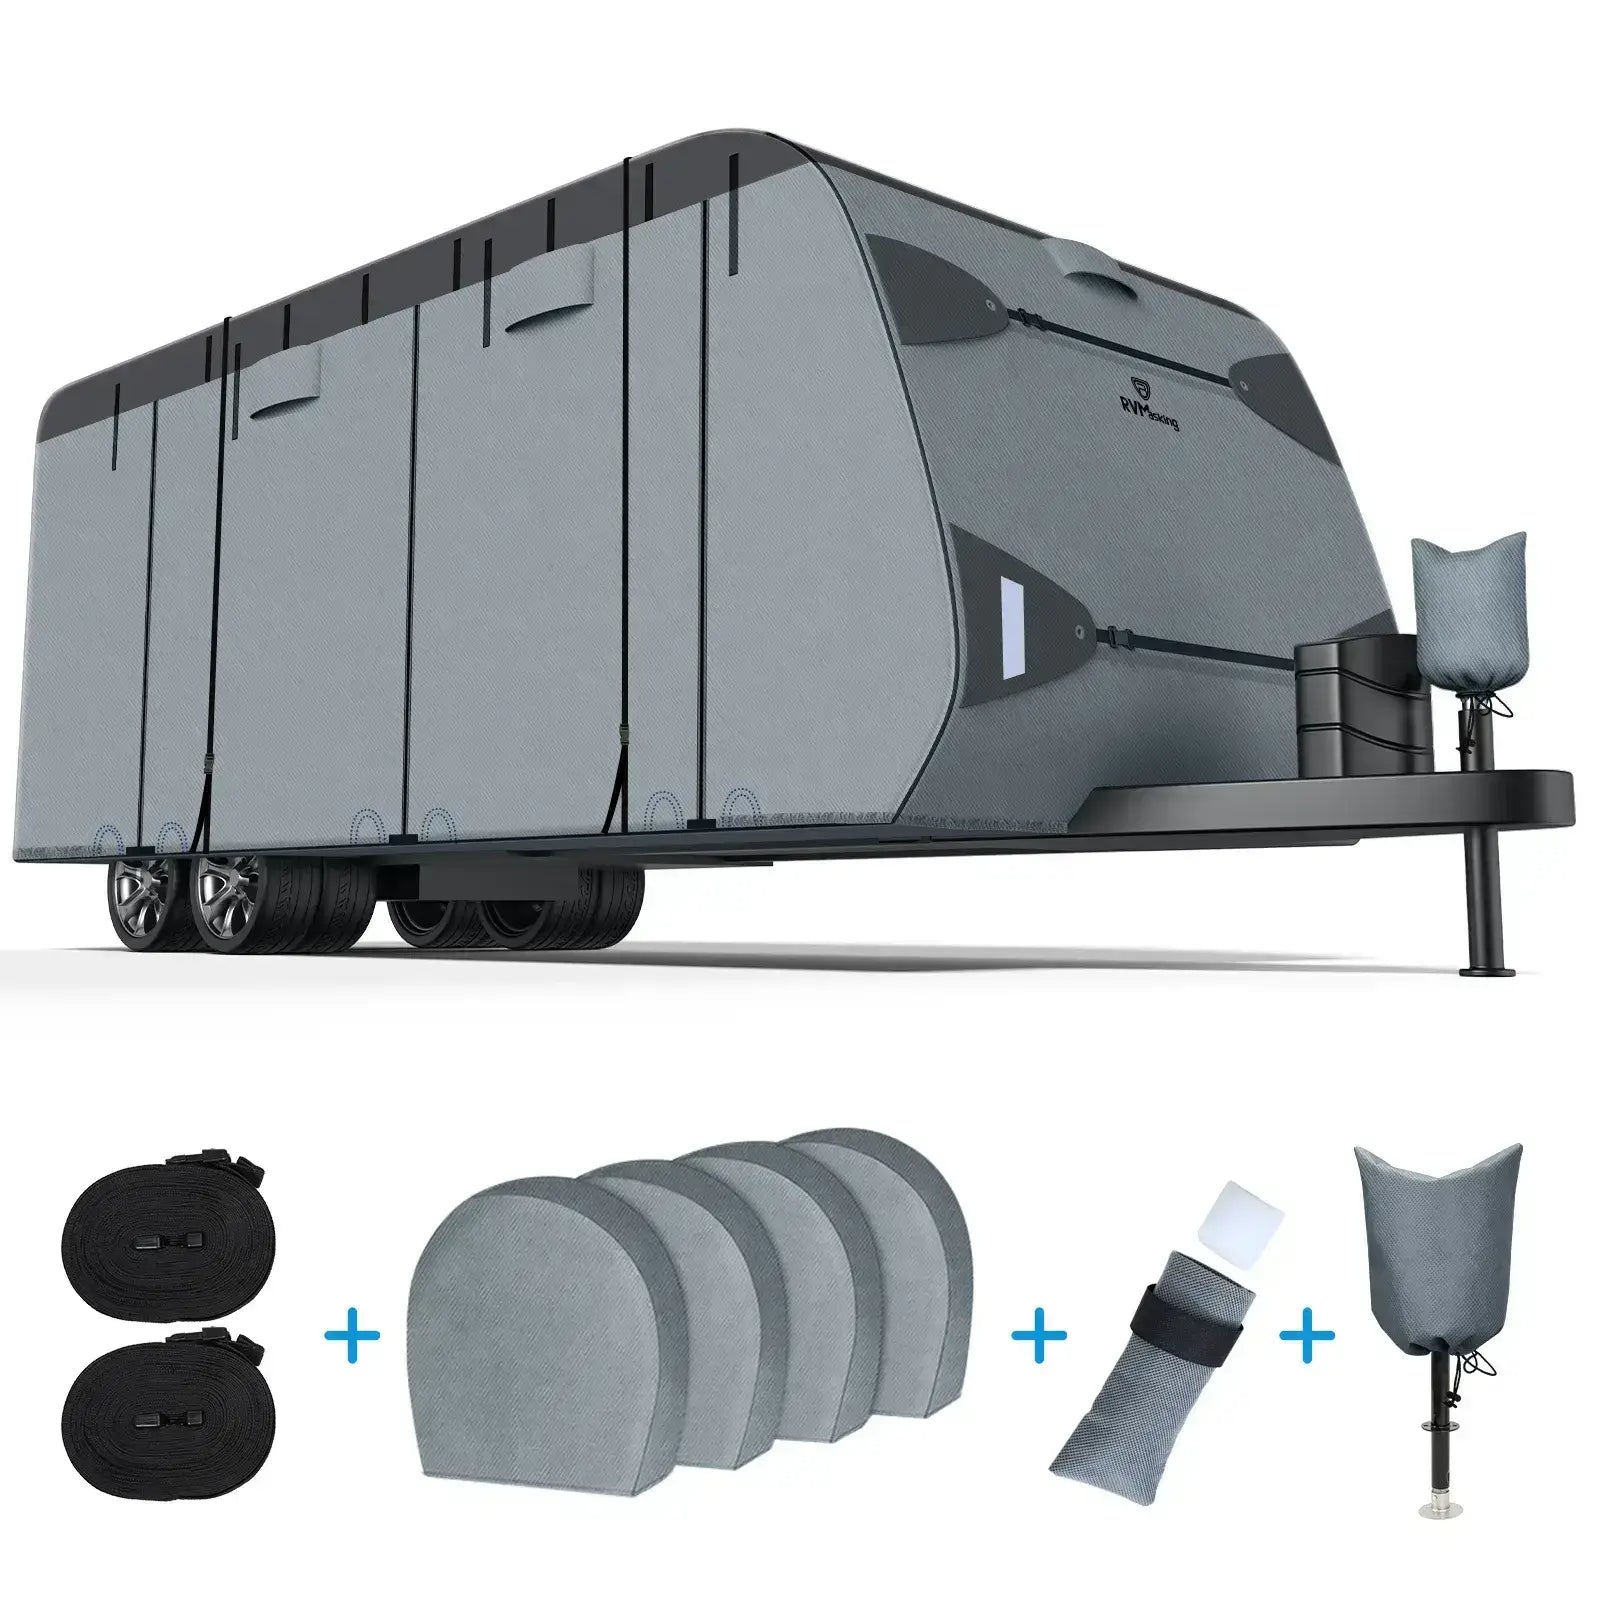 KNOX 3rd Gen Motorhome RV Cover Class A, Anti-Tear 7 Layer APEX Fabric,  Superior Class A Motorhome Cover, Camper RV Trailer Cover Includes Ladder  Cover, Tire Covers, and Gutter Covers - Size